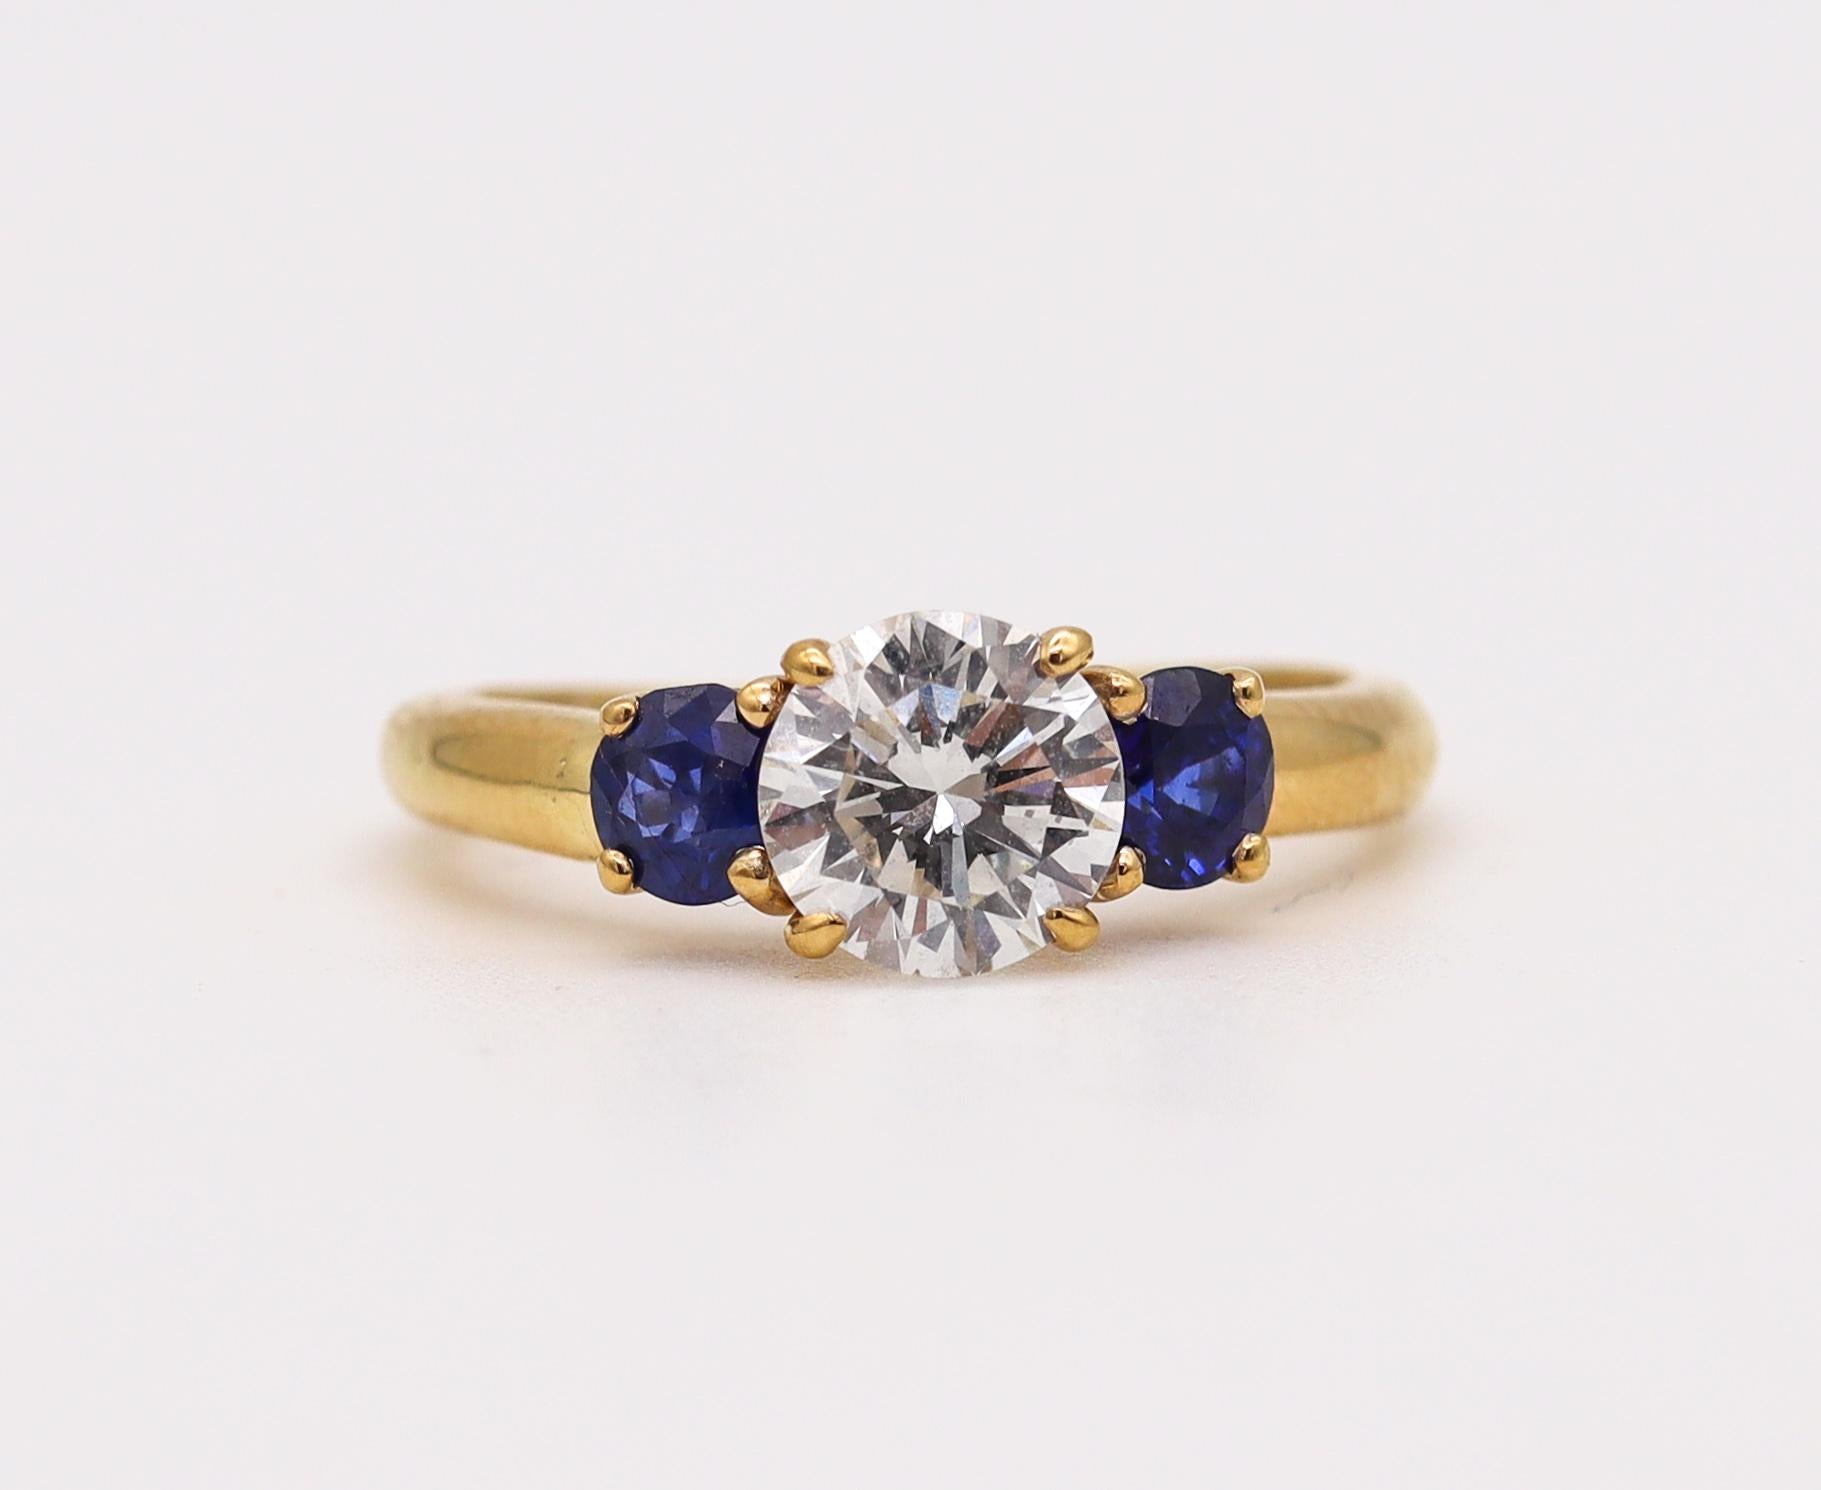 Modernist Van Cleef & Arpels Gia Certified Gems Ring in 18Kt Gold with Diamond & Sapphires